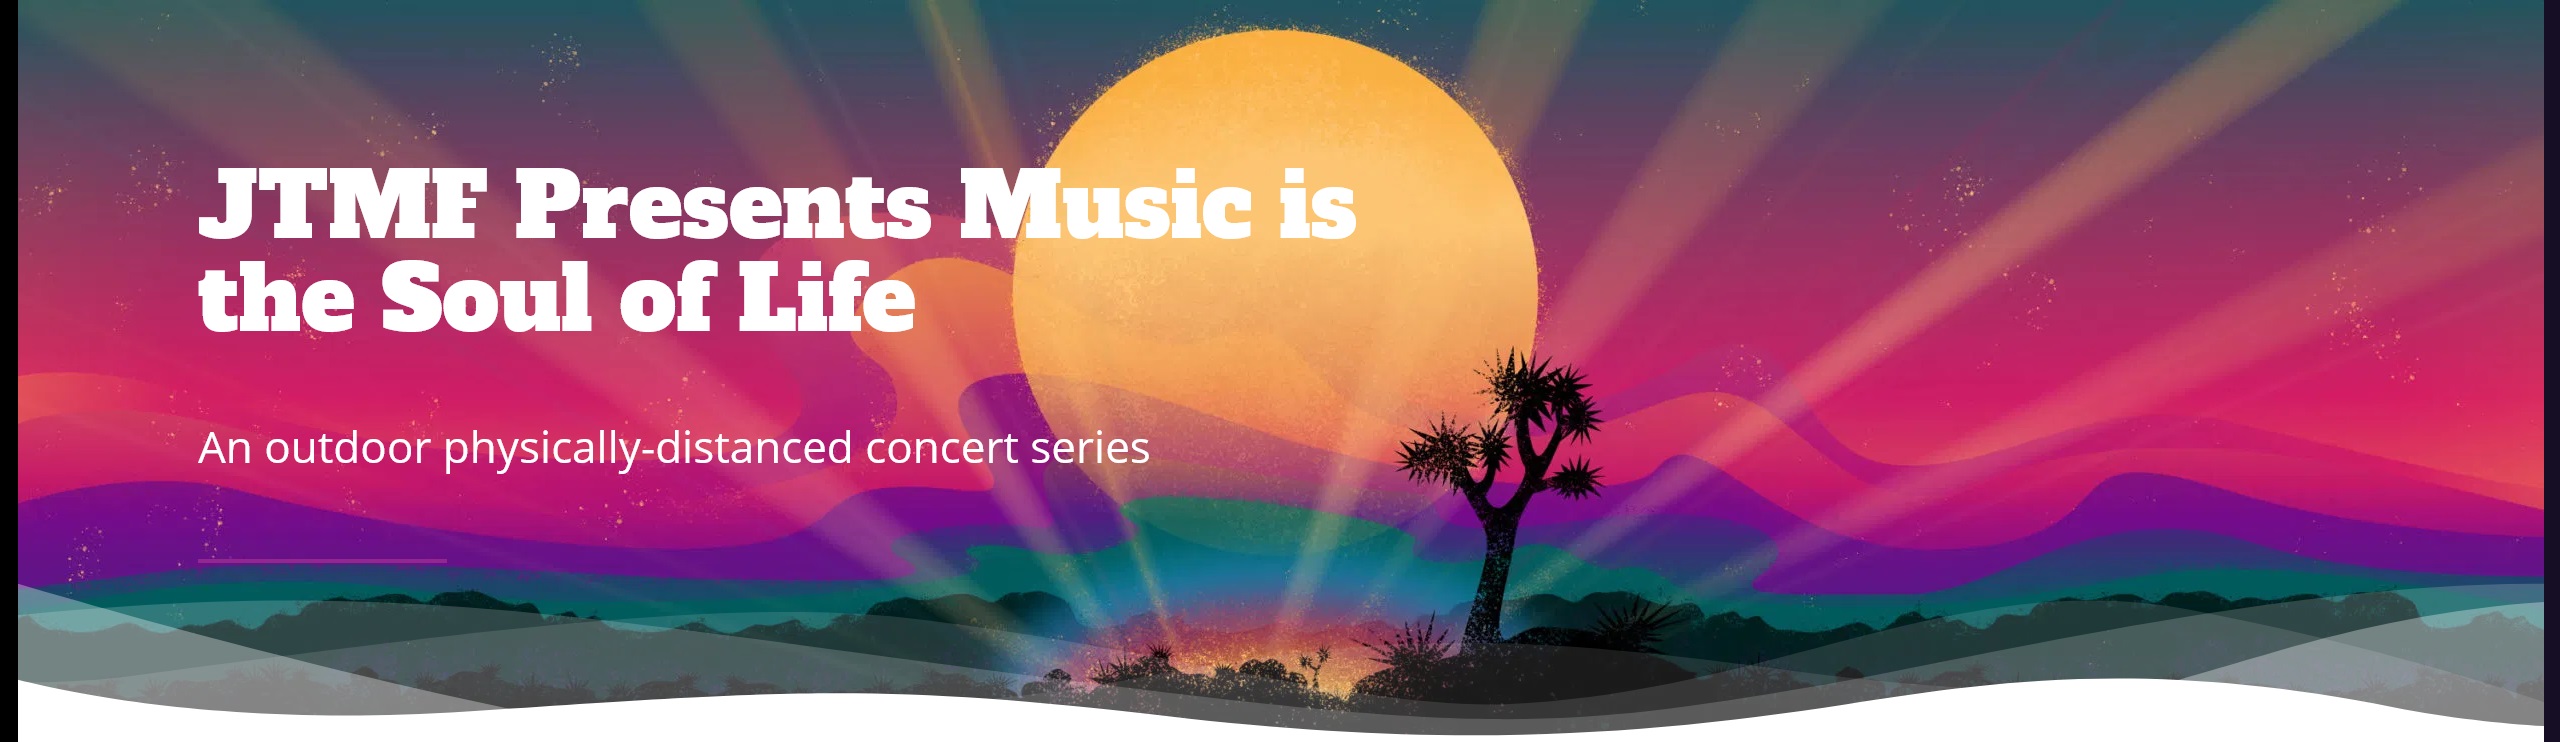 Joshua Tree Music Festival announces a series limited capacity outdoor shows starting April 23